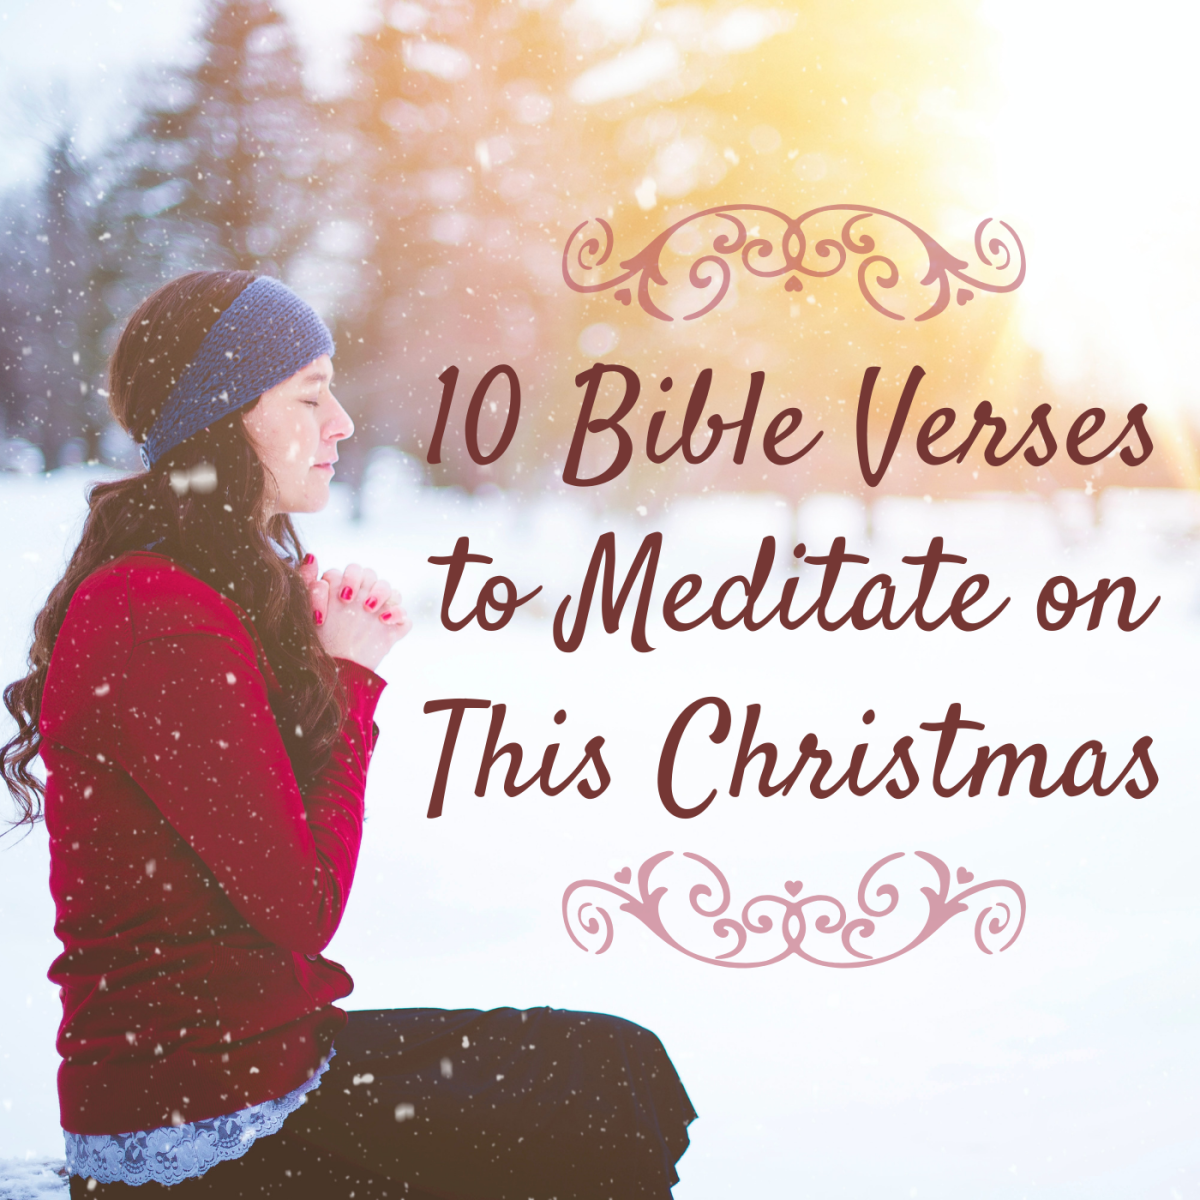 This holiday season, make some time to meditate on these meaningful Bible verses.